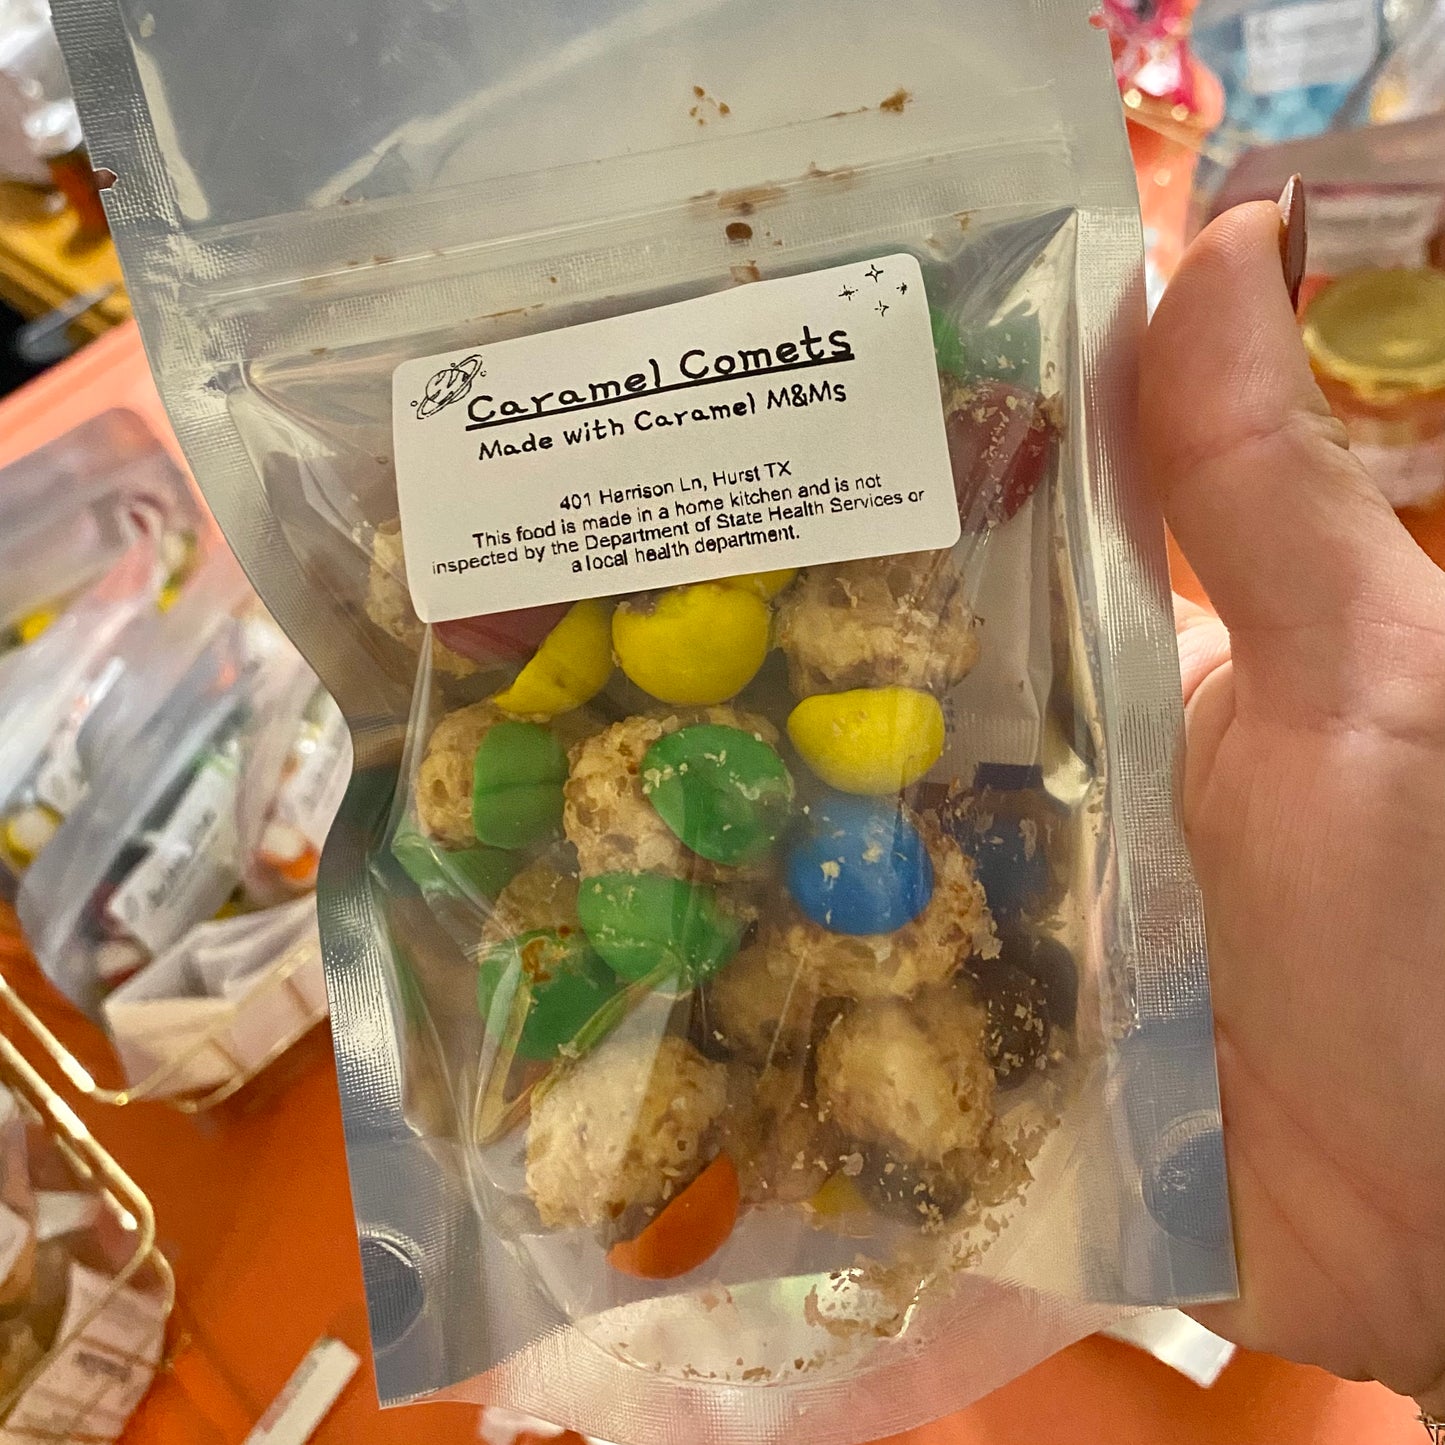 Caramel Comets - made with Caramel M&Ms